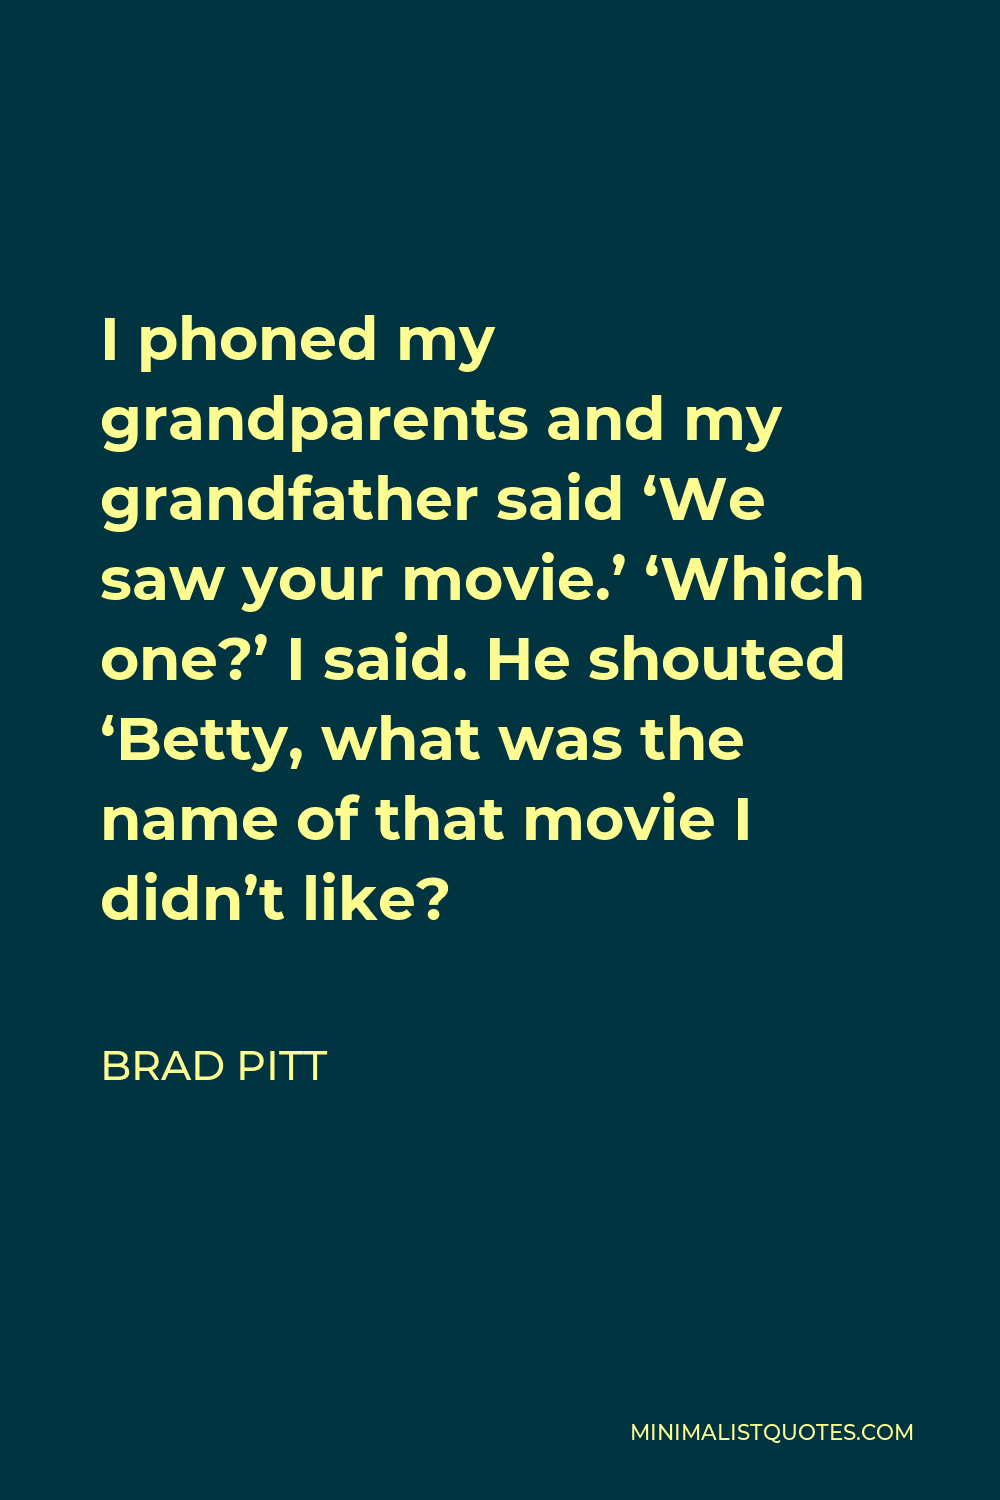 Brad Pitt Quote - I phoned my grandparents and my grandfather said ‘We saw your movie.’ ‘Which one?’ I said. He shouted ‘Betty, what was the name of that movie I didn’t like?